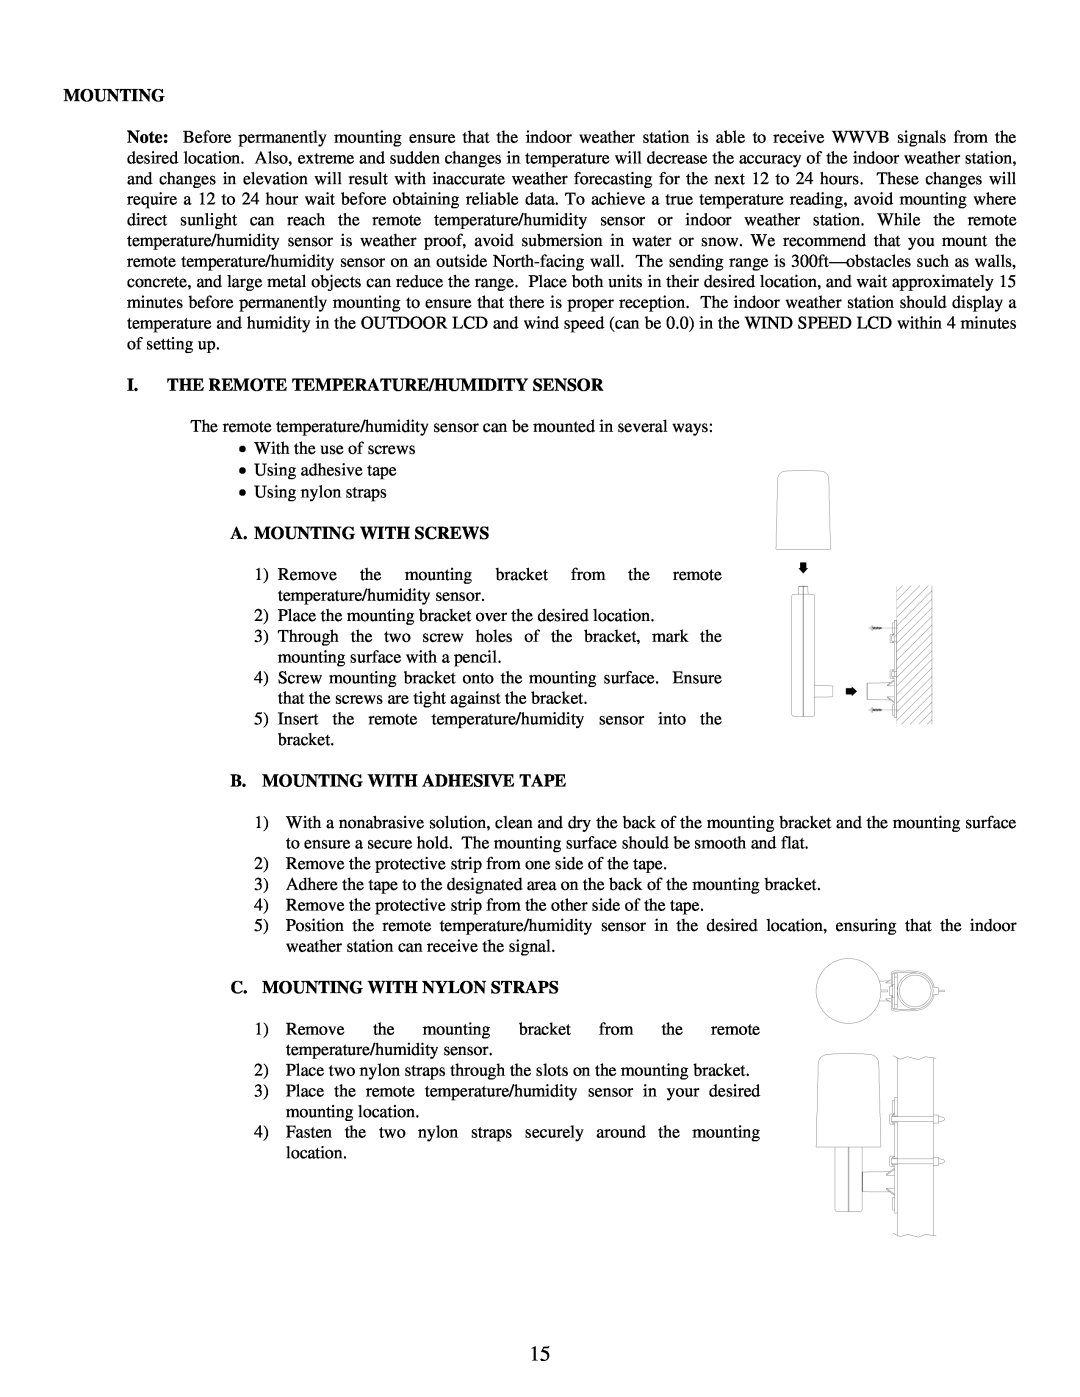 La Crosse Technology WS-9035TWC instruction manual I.The Remote Temperature/Humidity Sensor, A. Mounting With Screws 